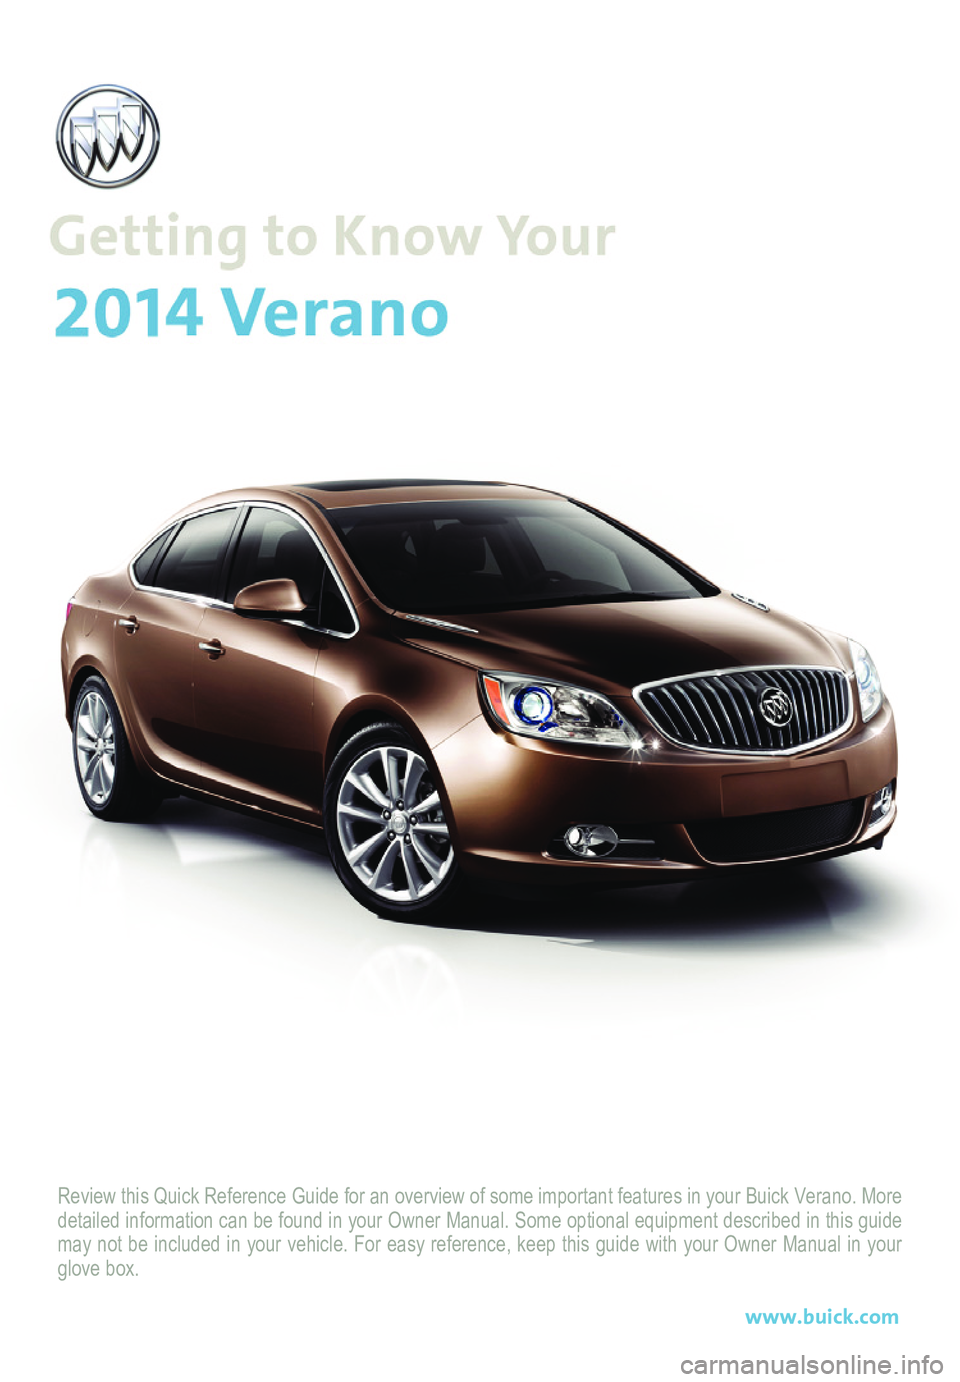 BUICK ENCLAVE 2013  Get To Know Guide Review this Quick Reference Guide for an overview of some important feat\
ures in your Buick Verano. More detailed information can be found in your Owner Manual. Some optional eq\
uipment described in